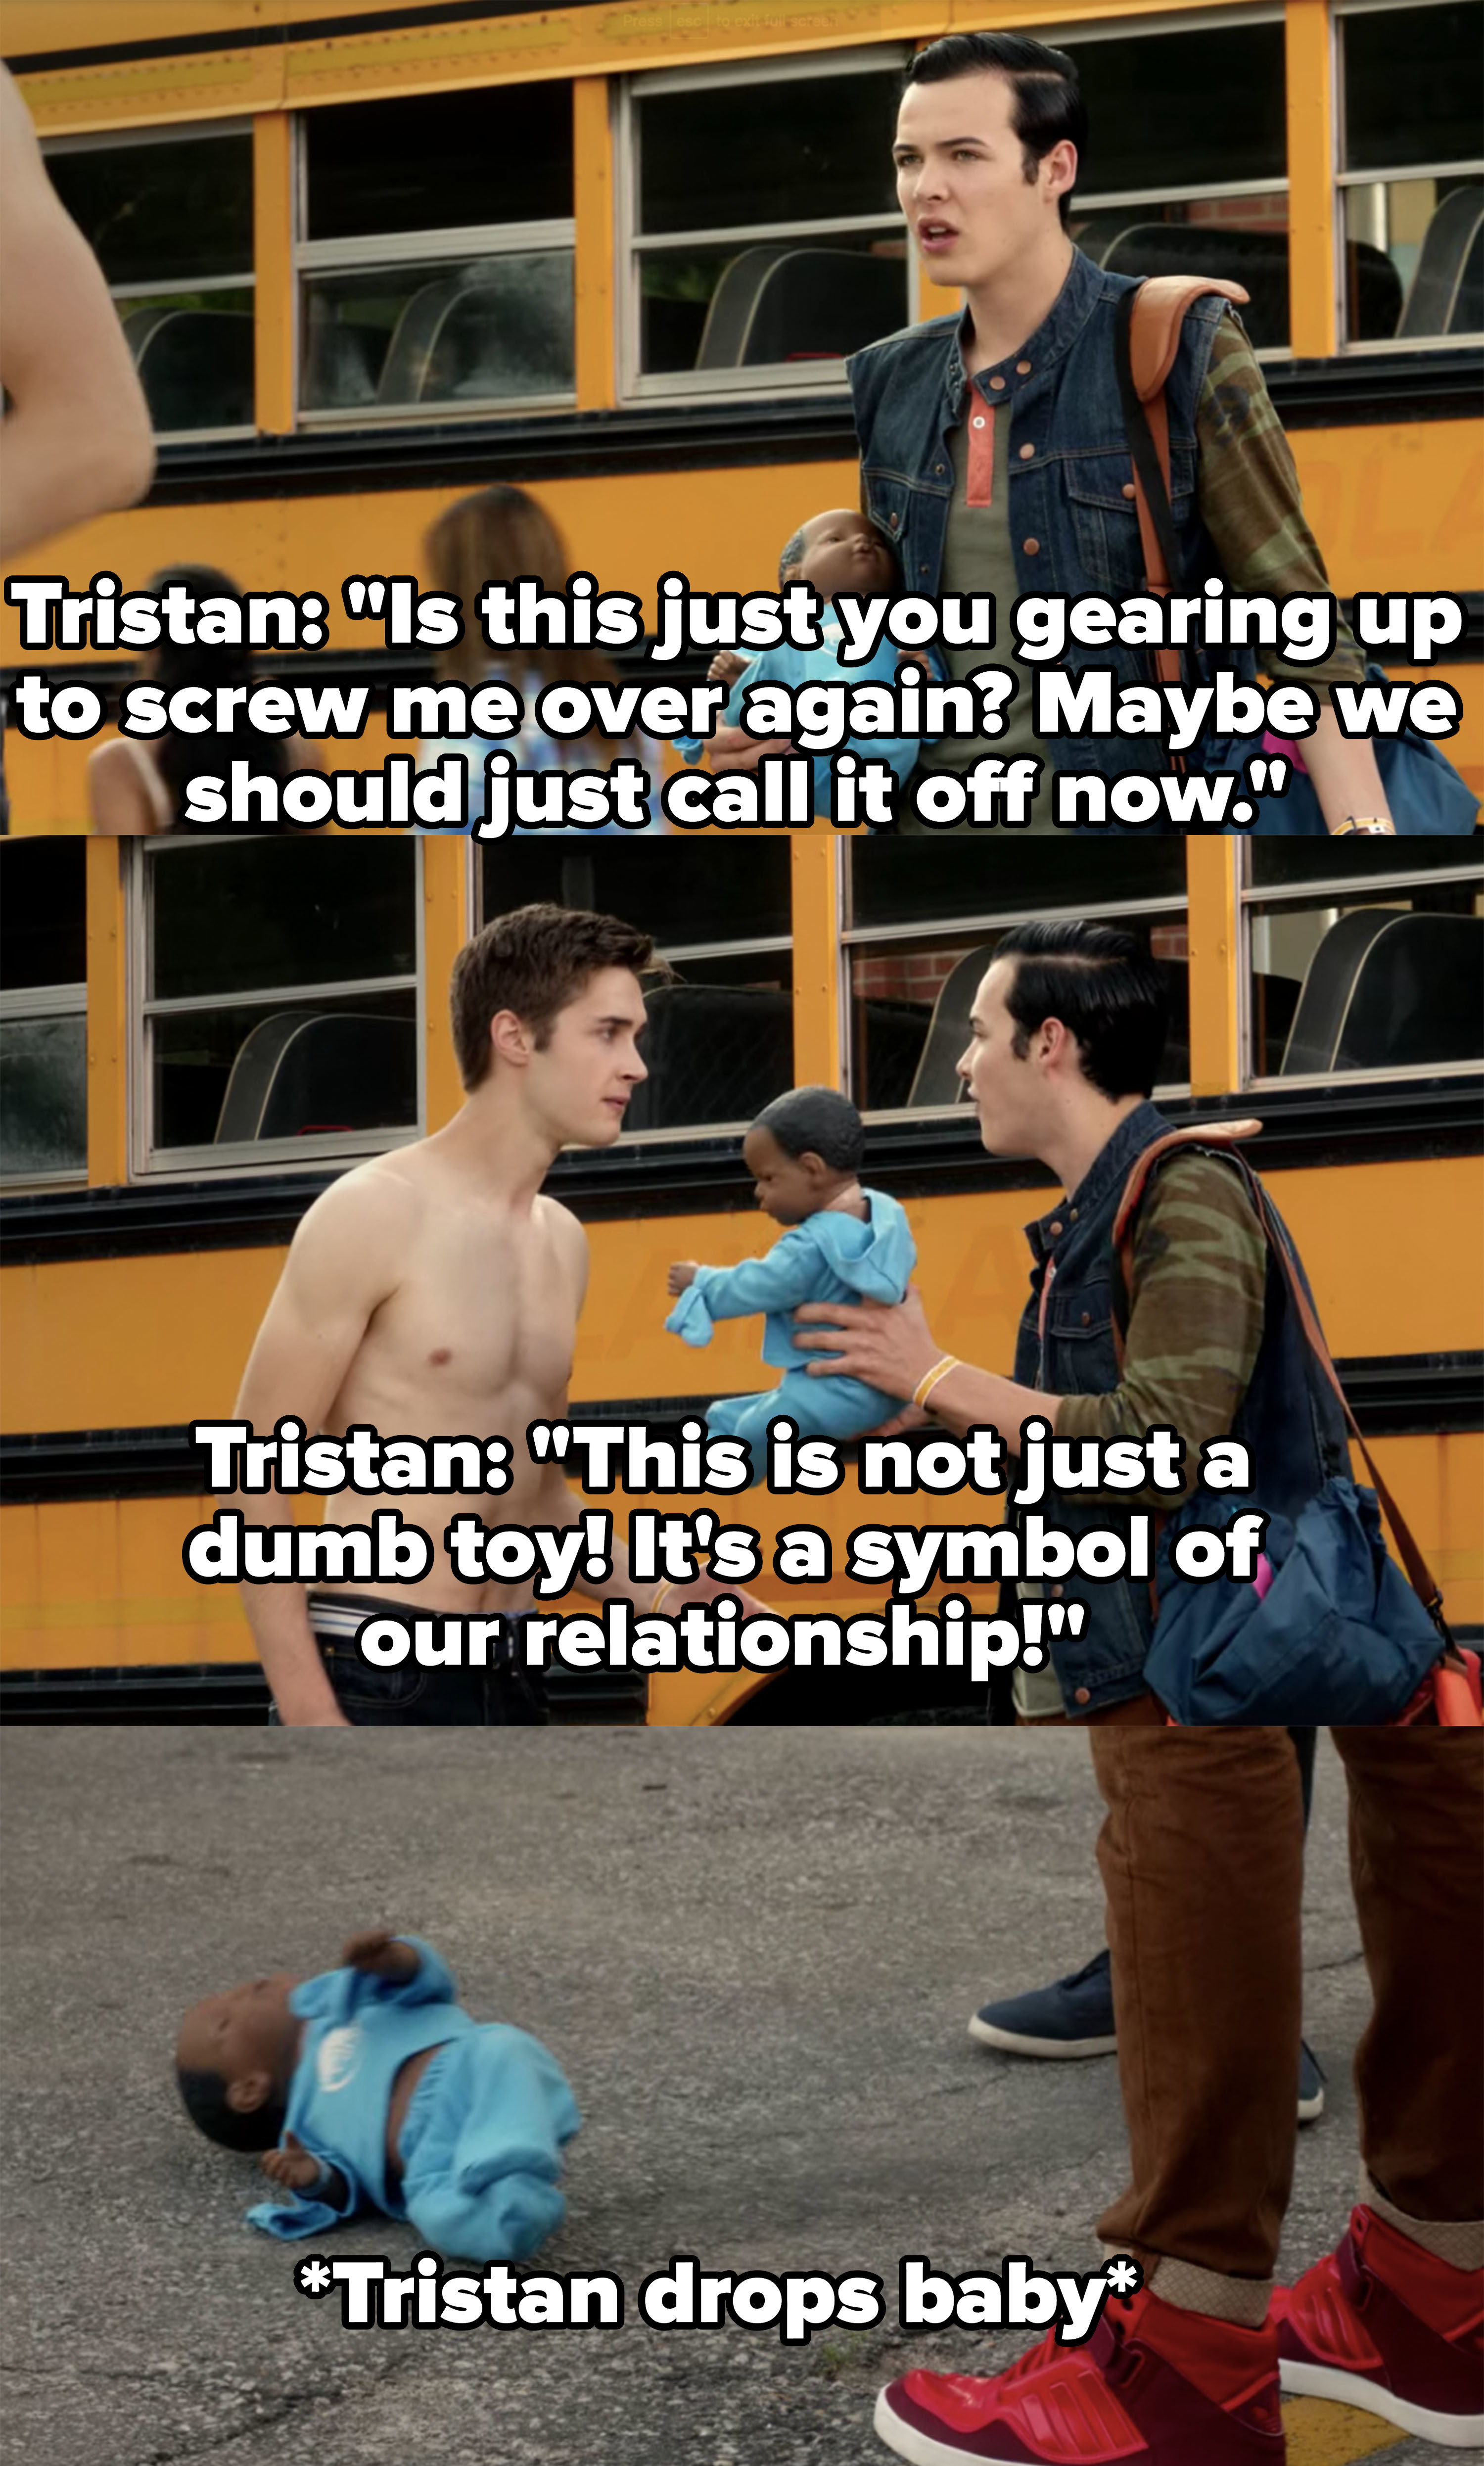 Miles and Tristan fight over school project, Tristan calls it a &quot;symbol of their relationship&quot;